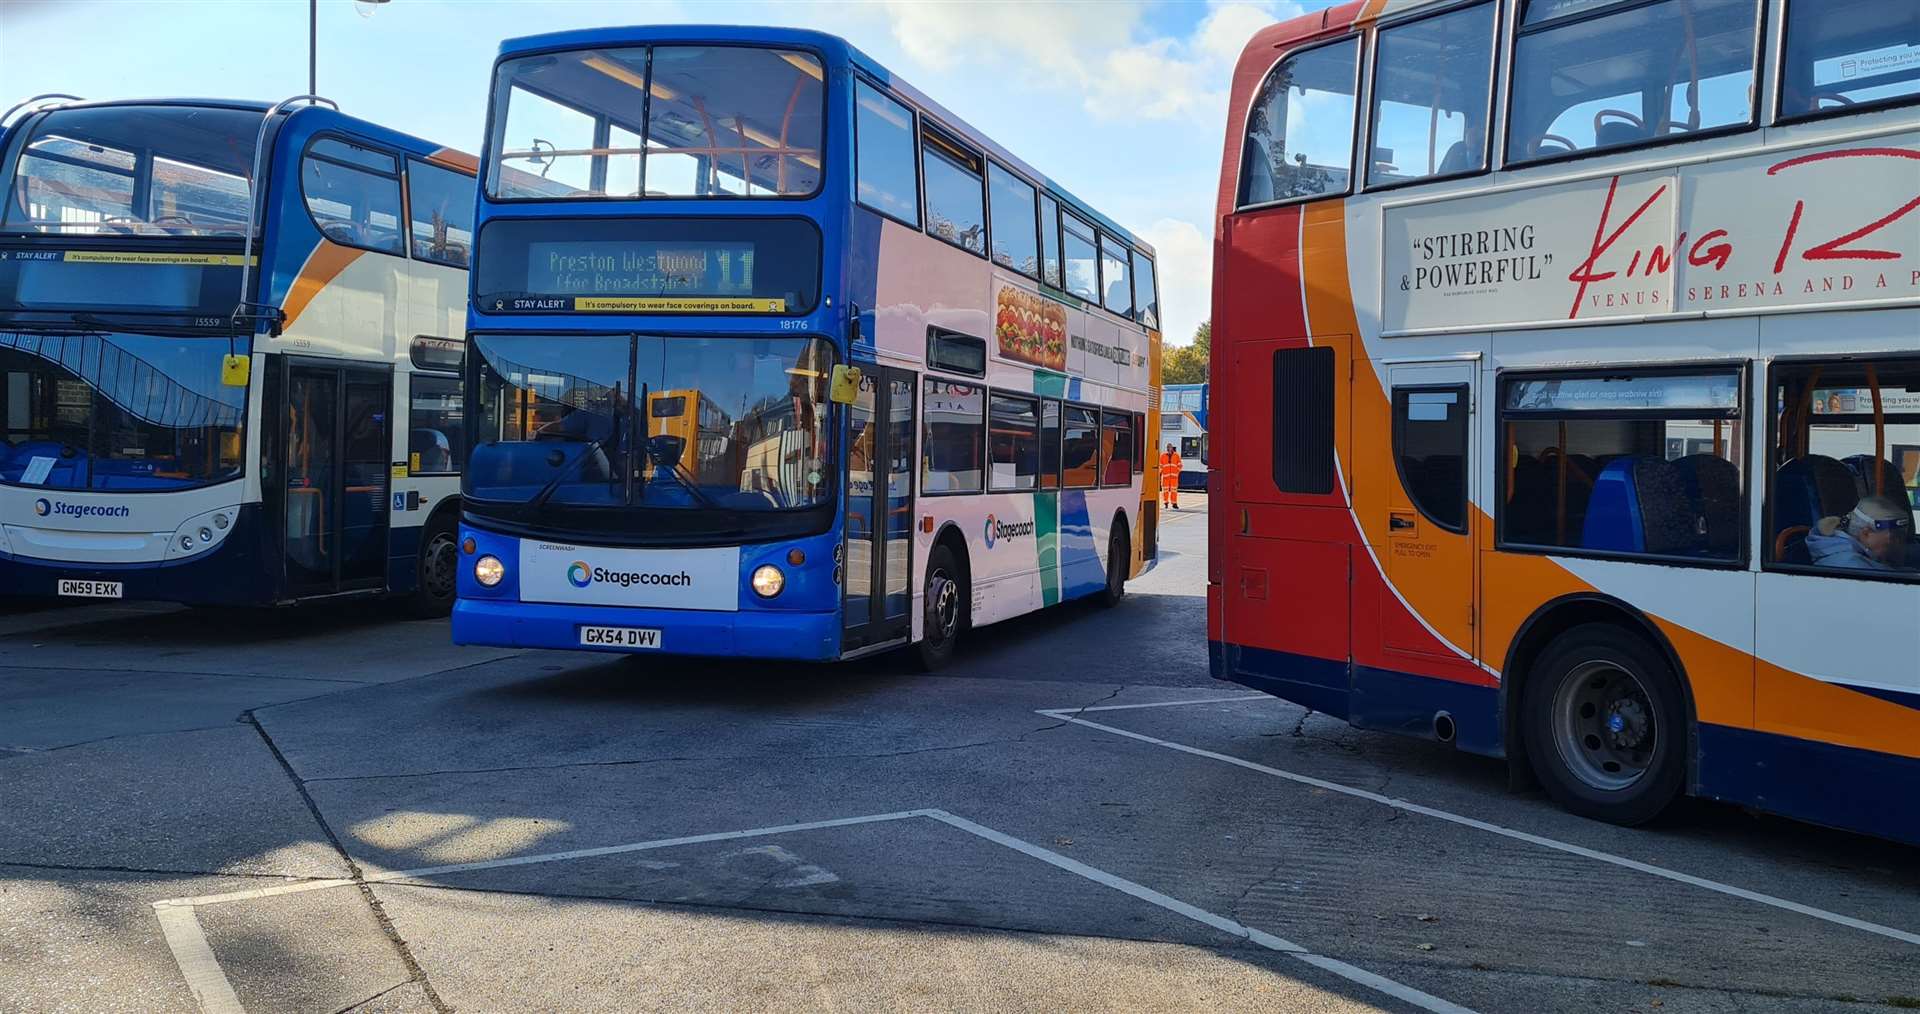 The new off-peak Monday-Friday route will be the number 14 and run between Ashford town centre and Wye, calling at Little Burton